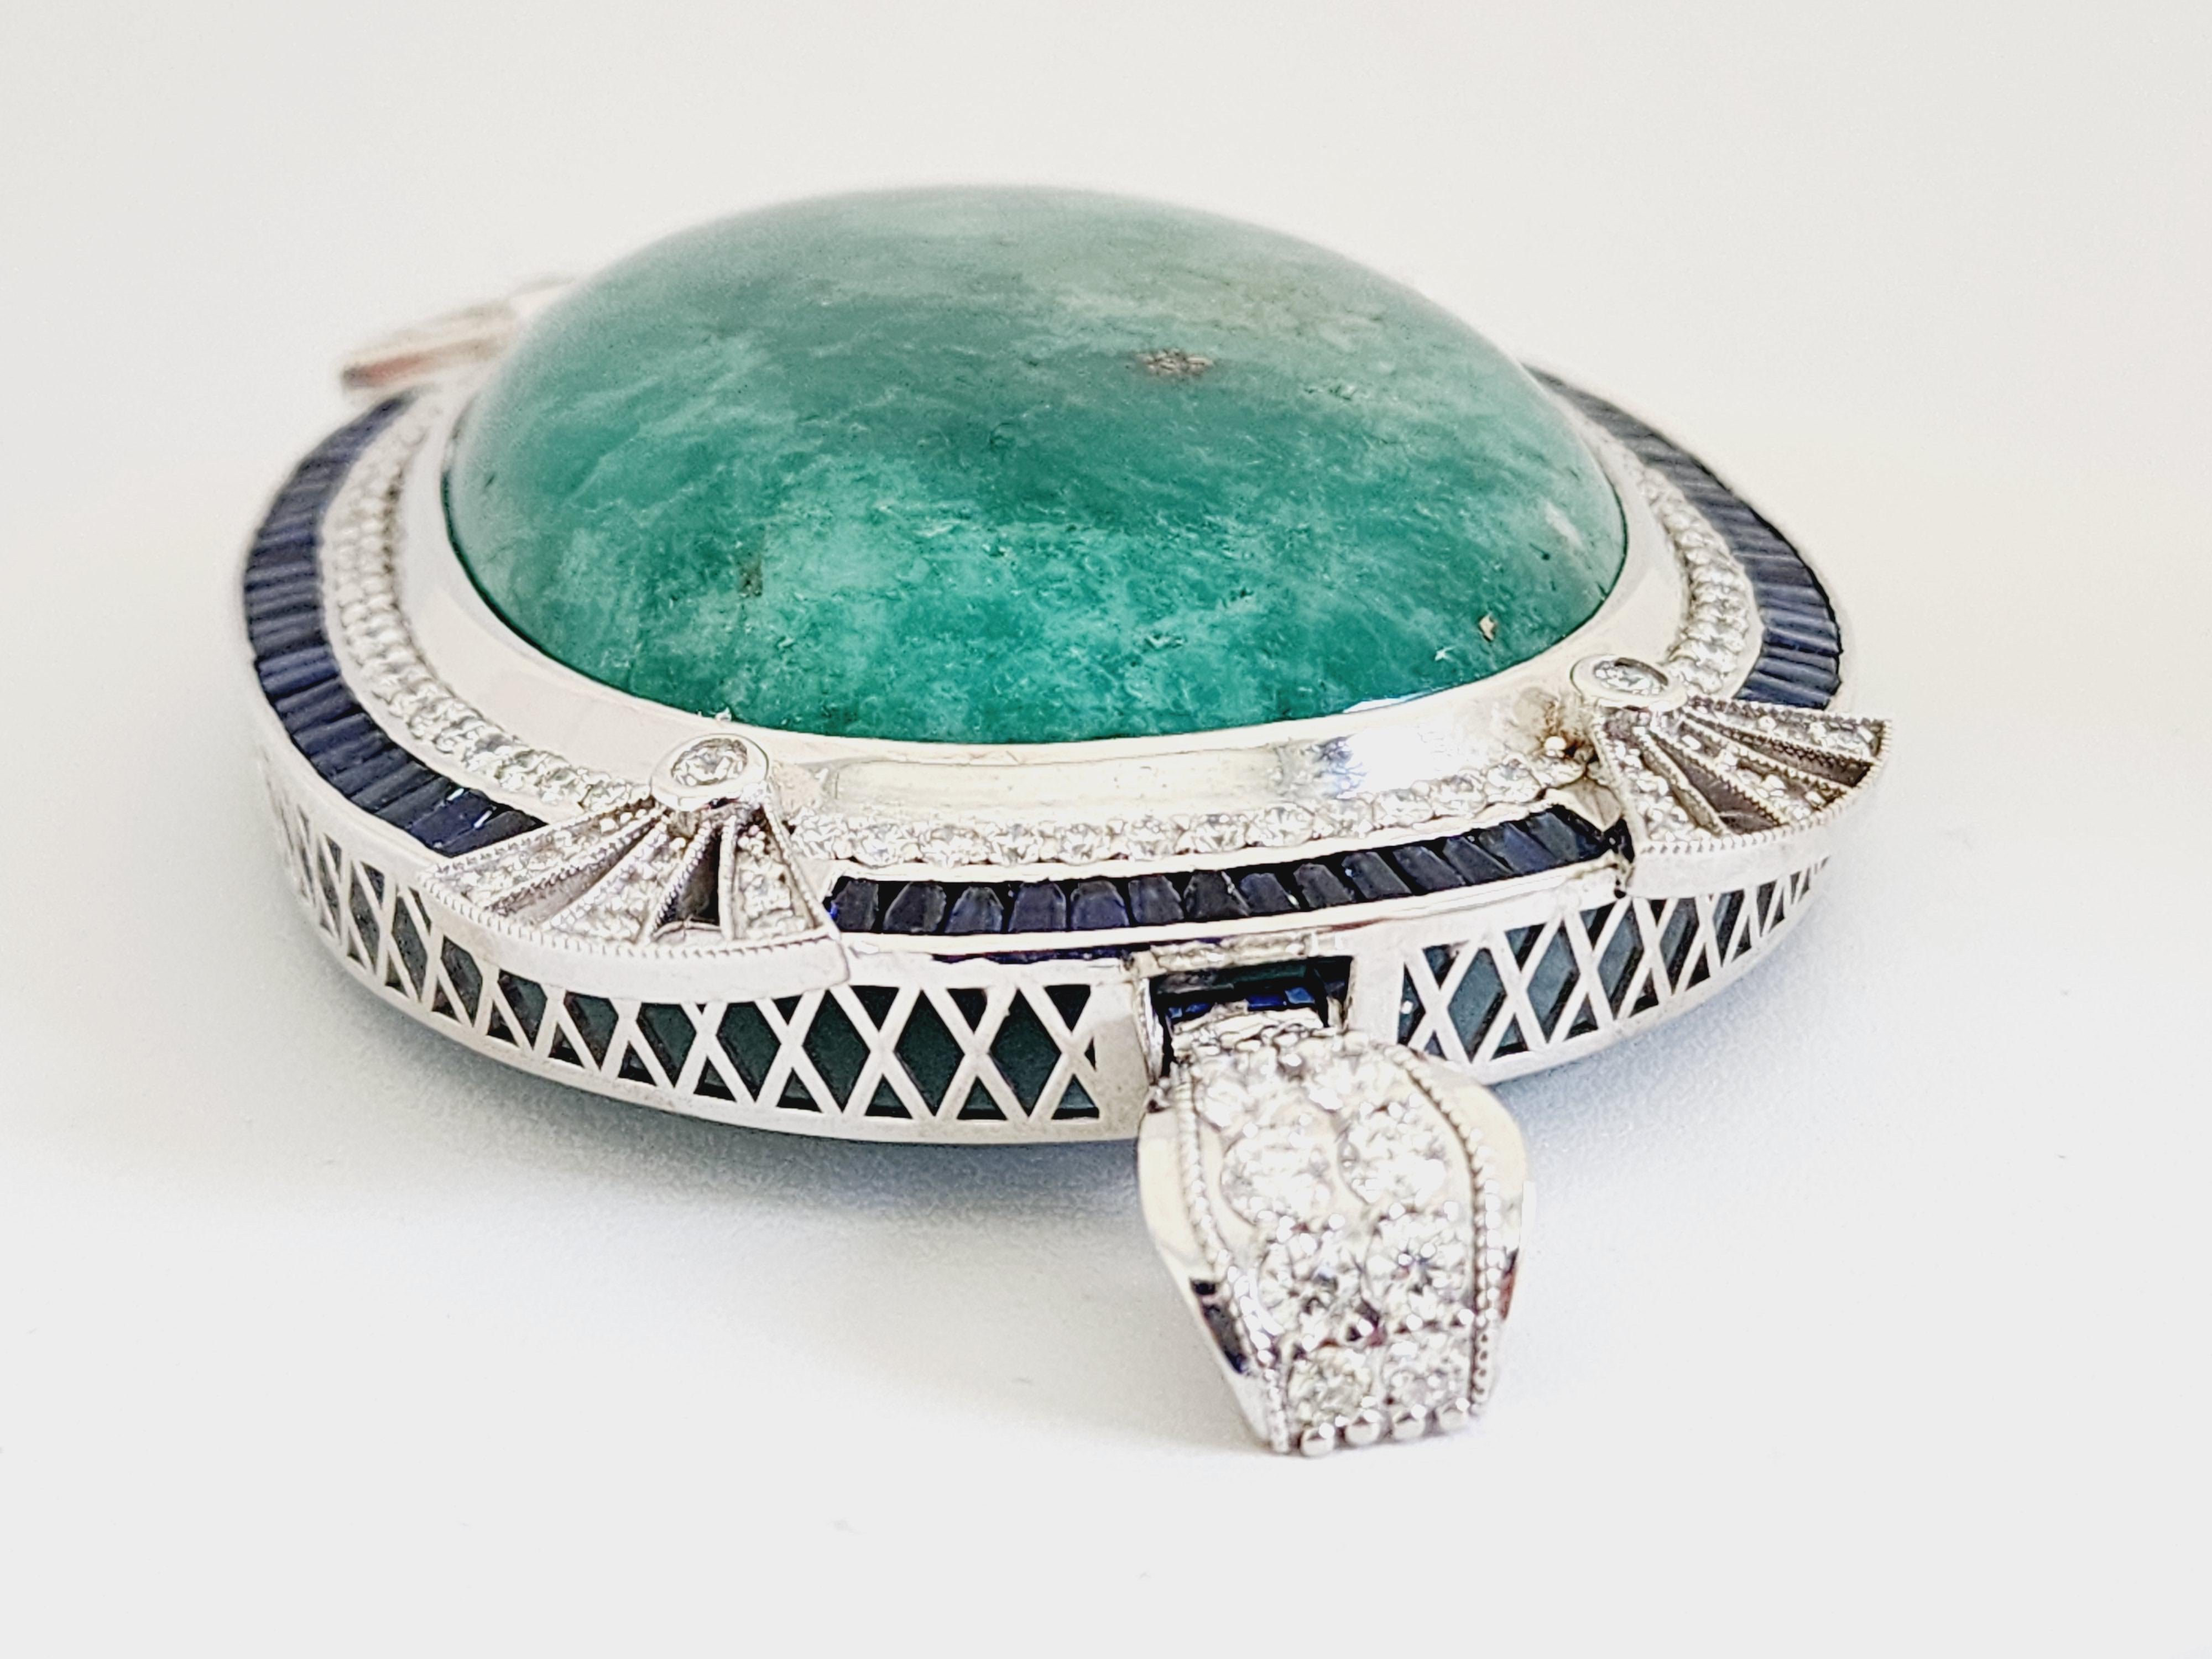 480 Carats Natural Emerald Diamond Sapphire Pendant White Gold 18 Karat In New Condition For Sale In Great Neck, NY